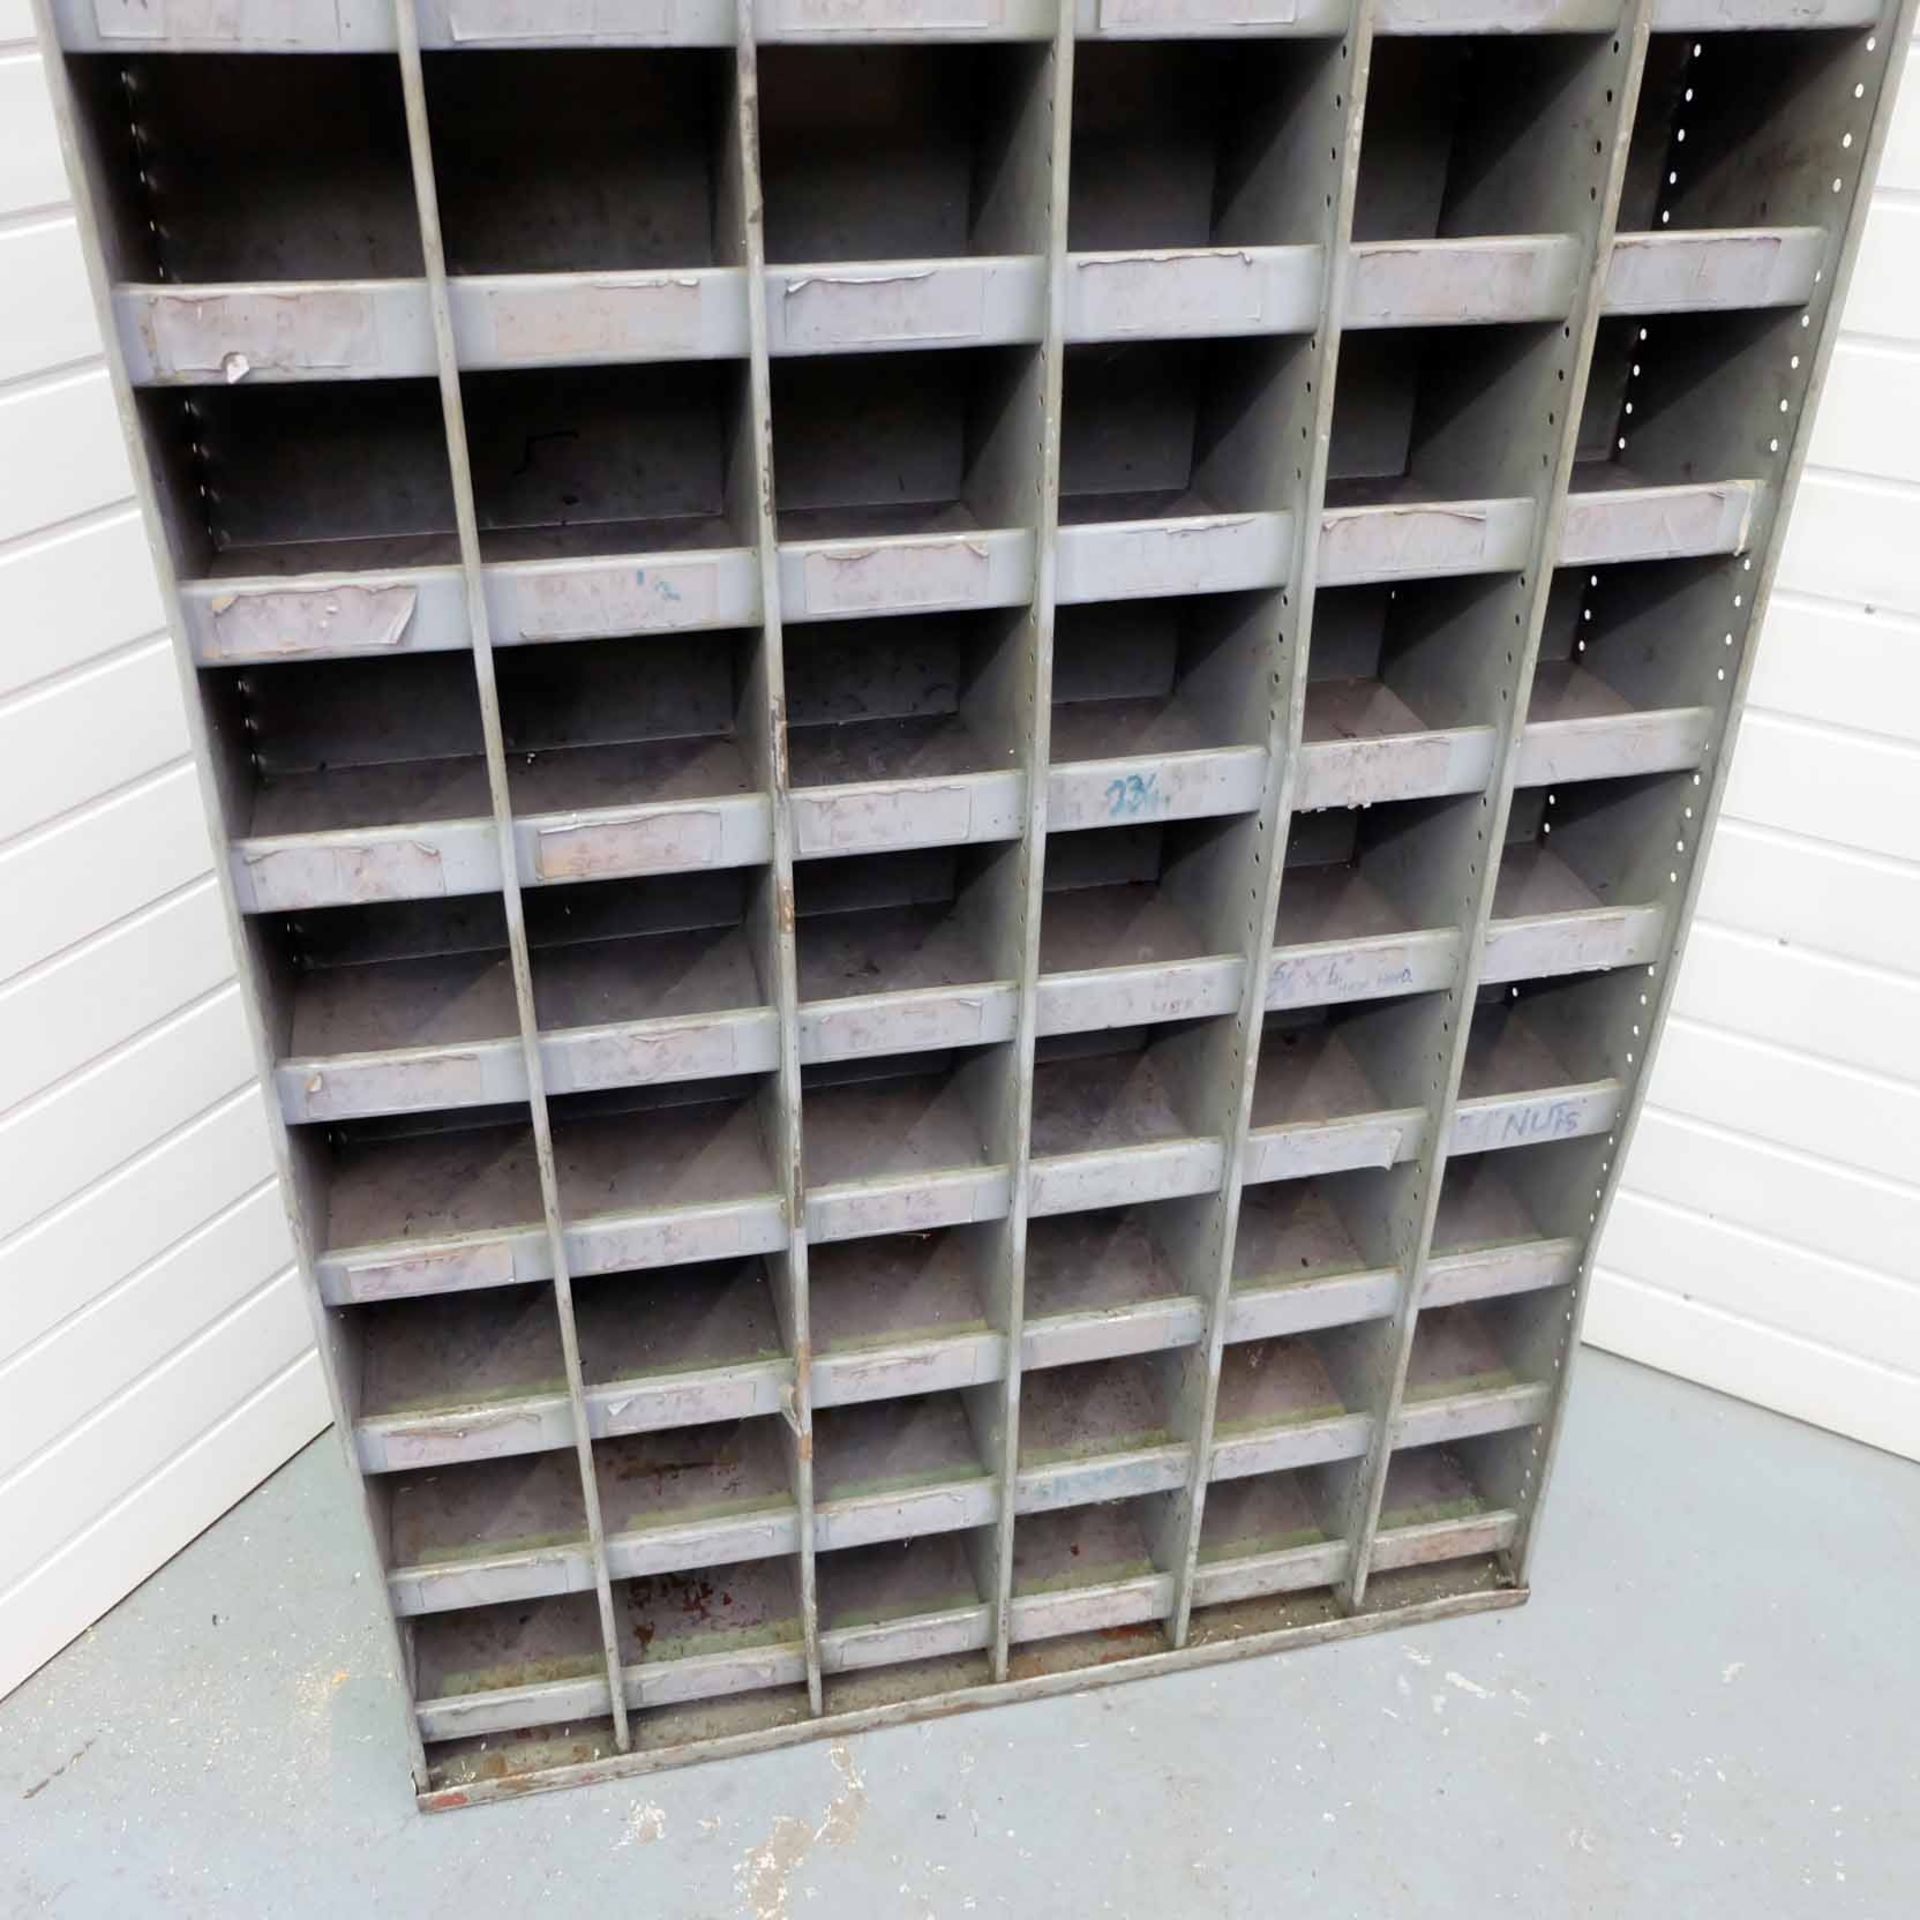 Set of Steel Pigeon Holes. 78 Compartments. Size 36" x 8 3/4" x 72" High. - Image 4 of 4